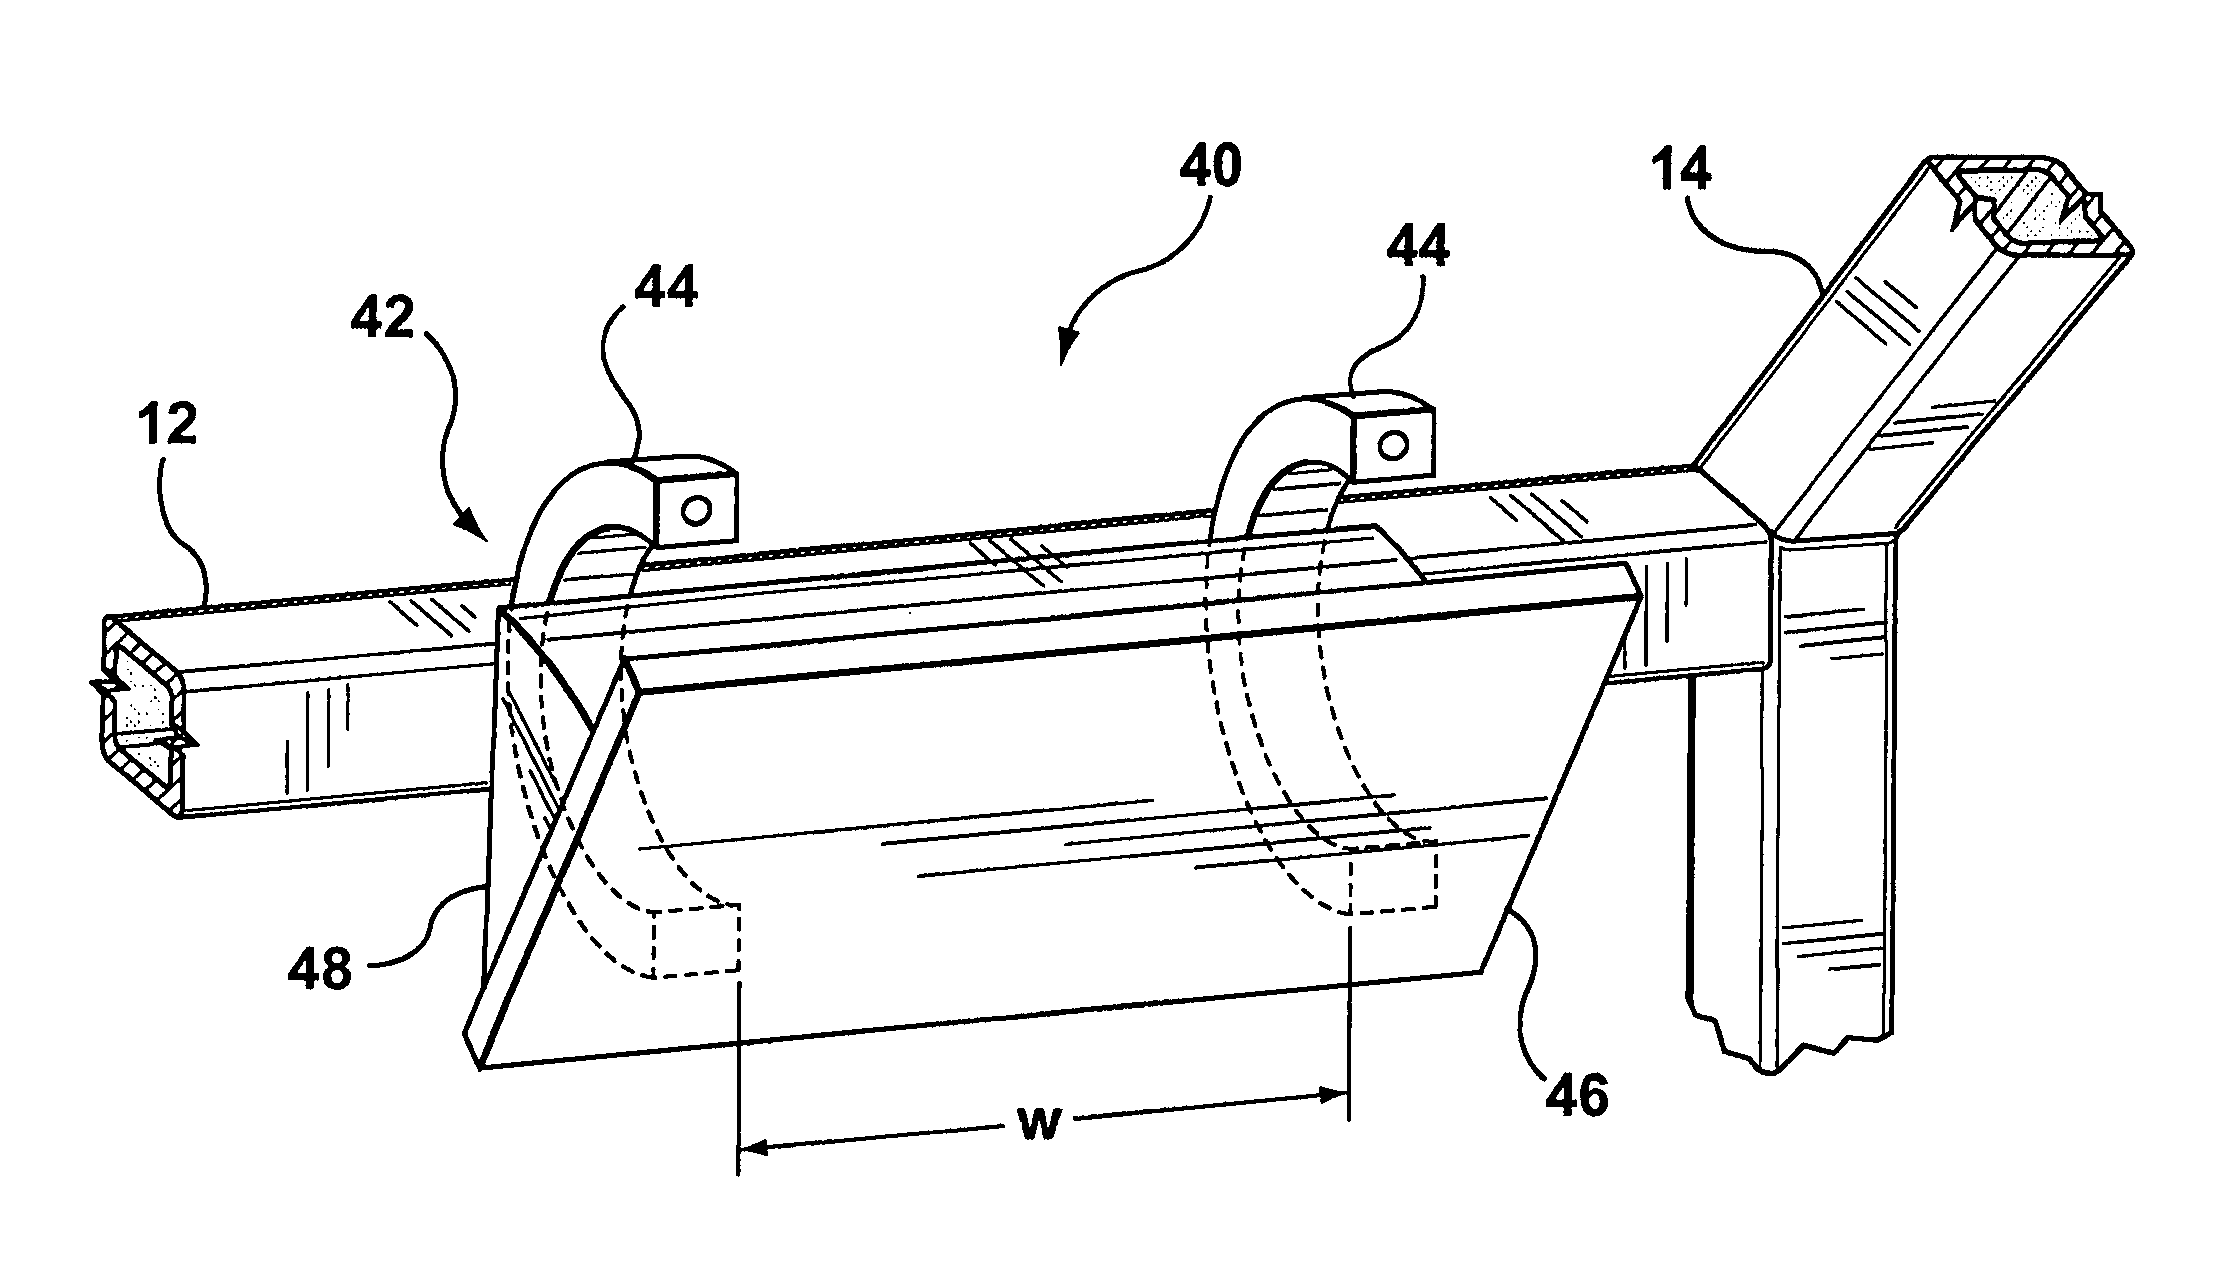 Instrument panel subassembly including a glove box door